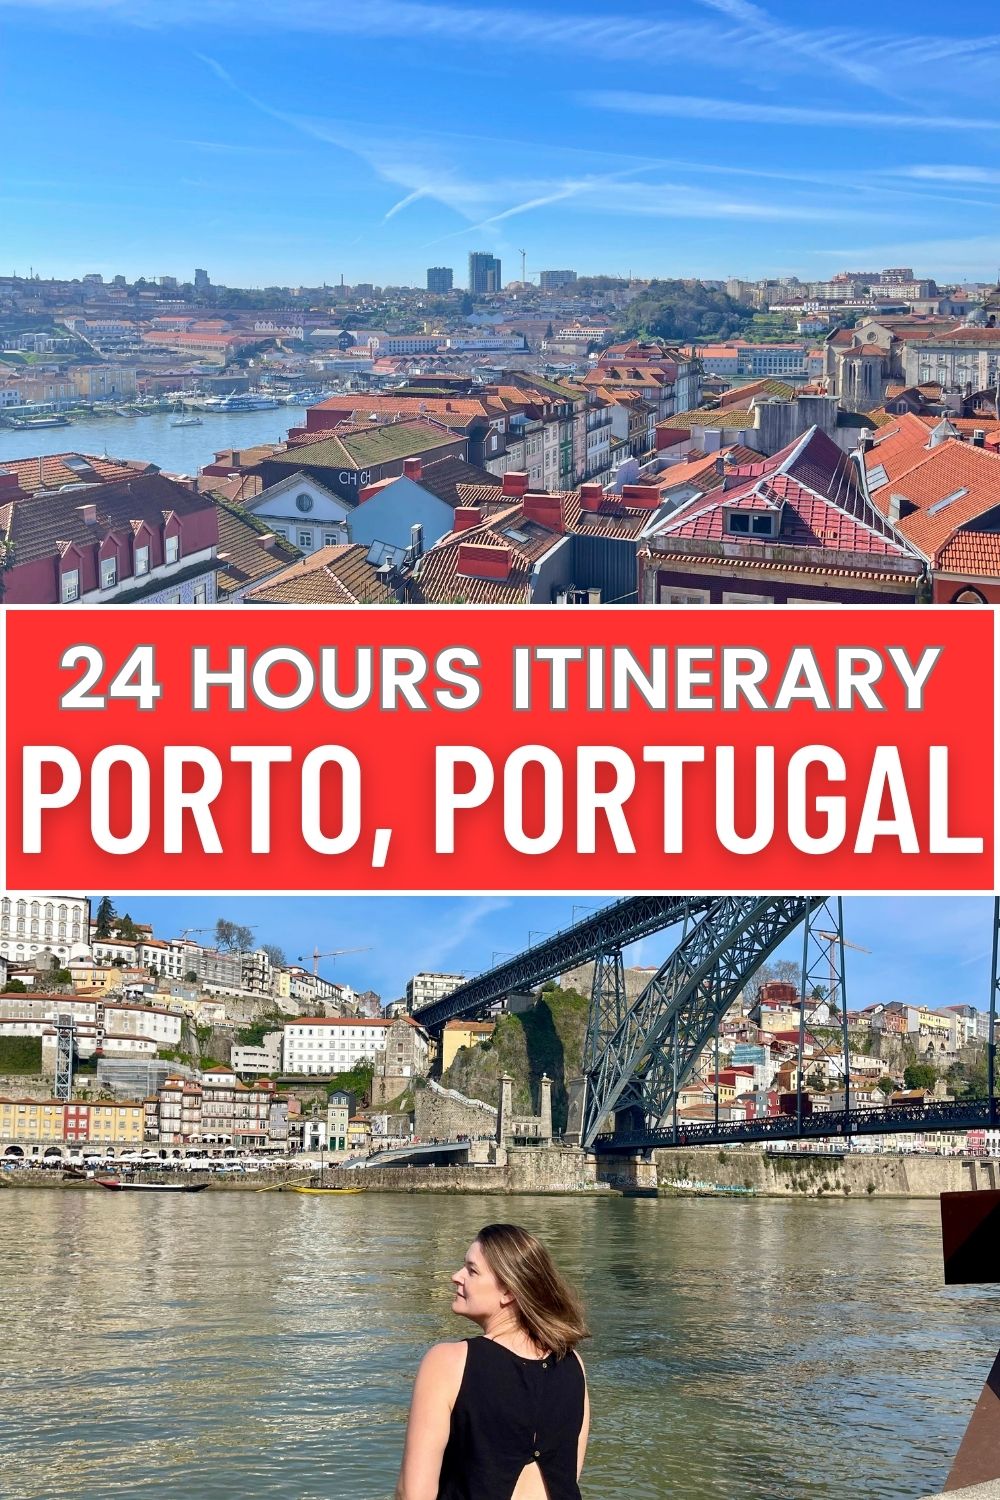 Promotional banner for a 1 Day Itinerary in Porto, Portugal, featuring a view of the city's terracotta rooftops and the Douro River.